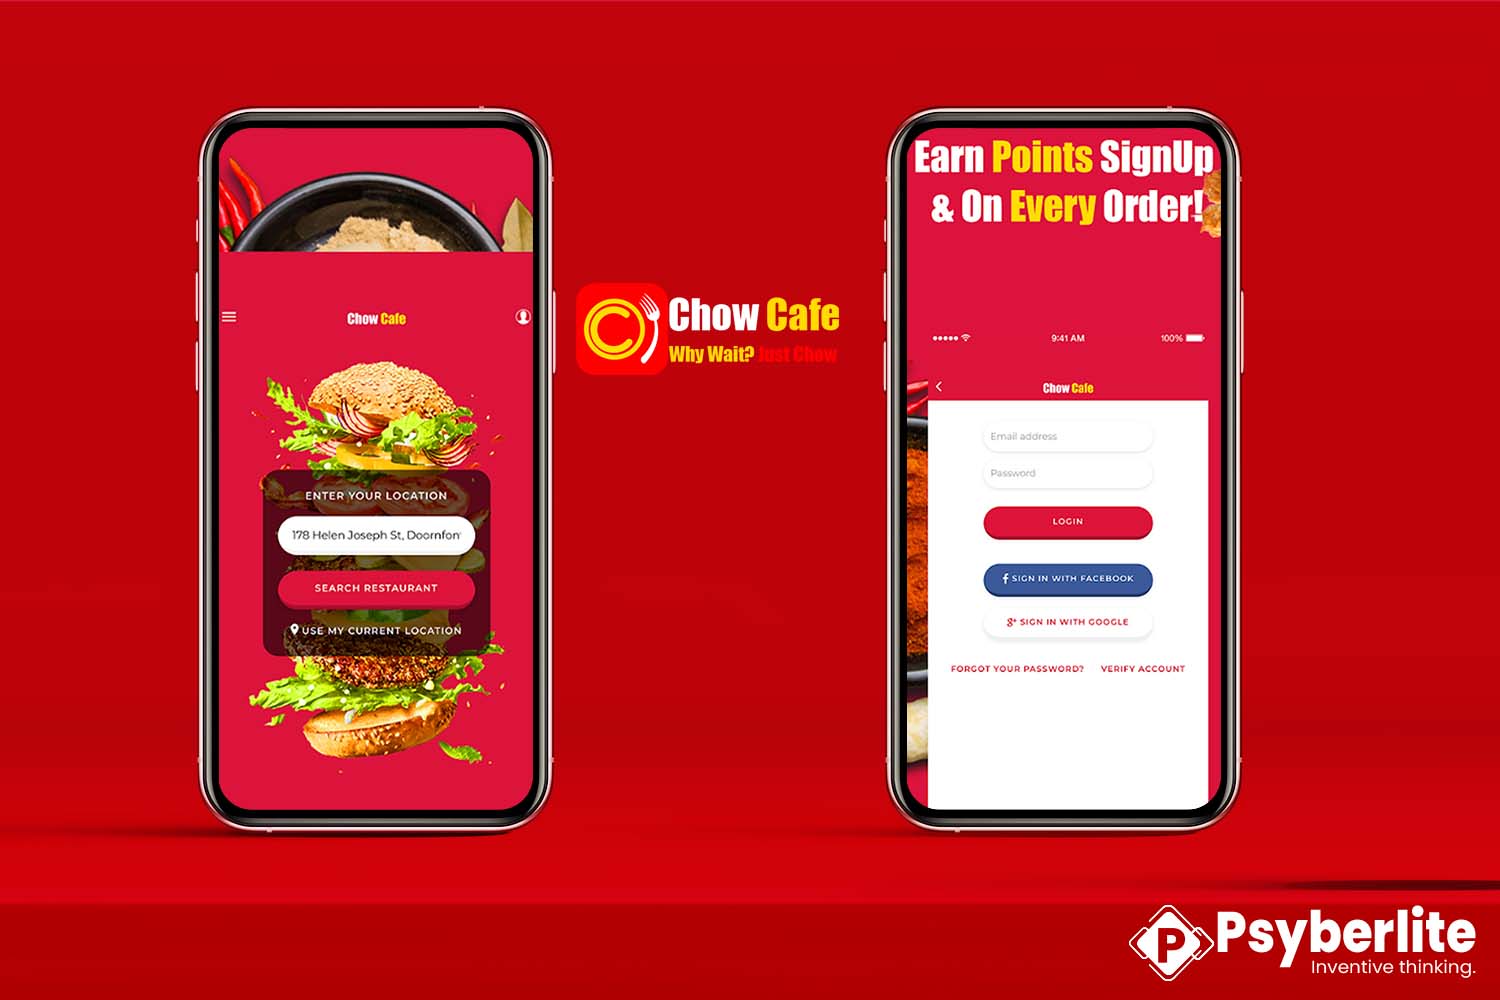 https://www.psyberlite.com/project/chow-cafe-food-ordering-app/